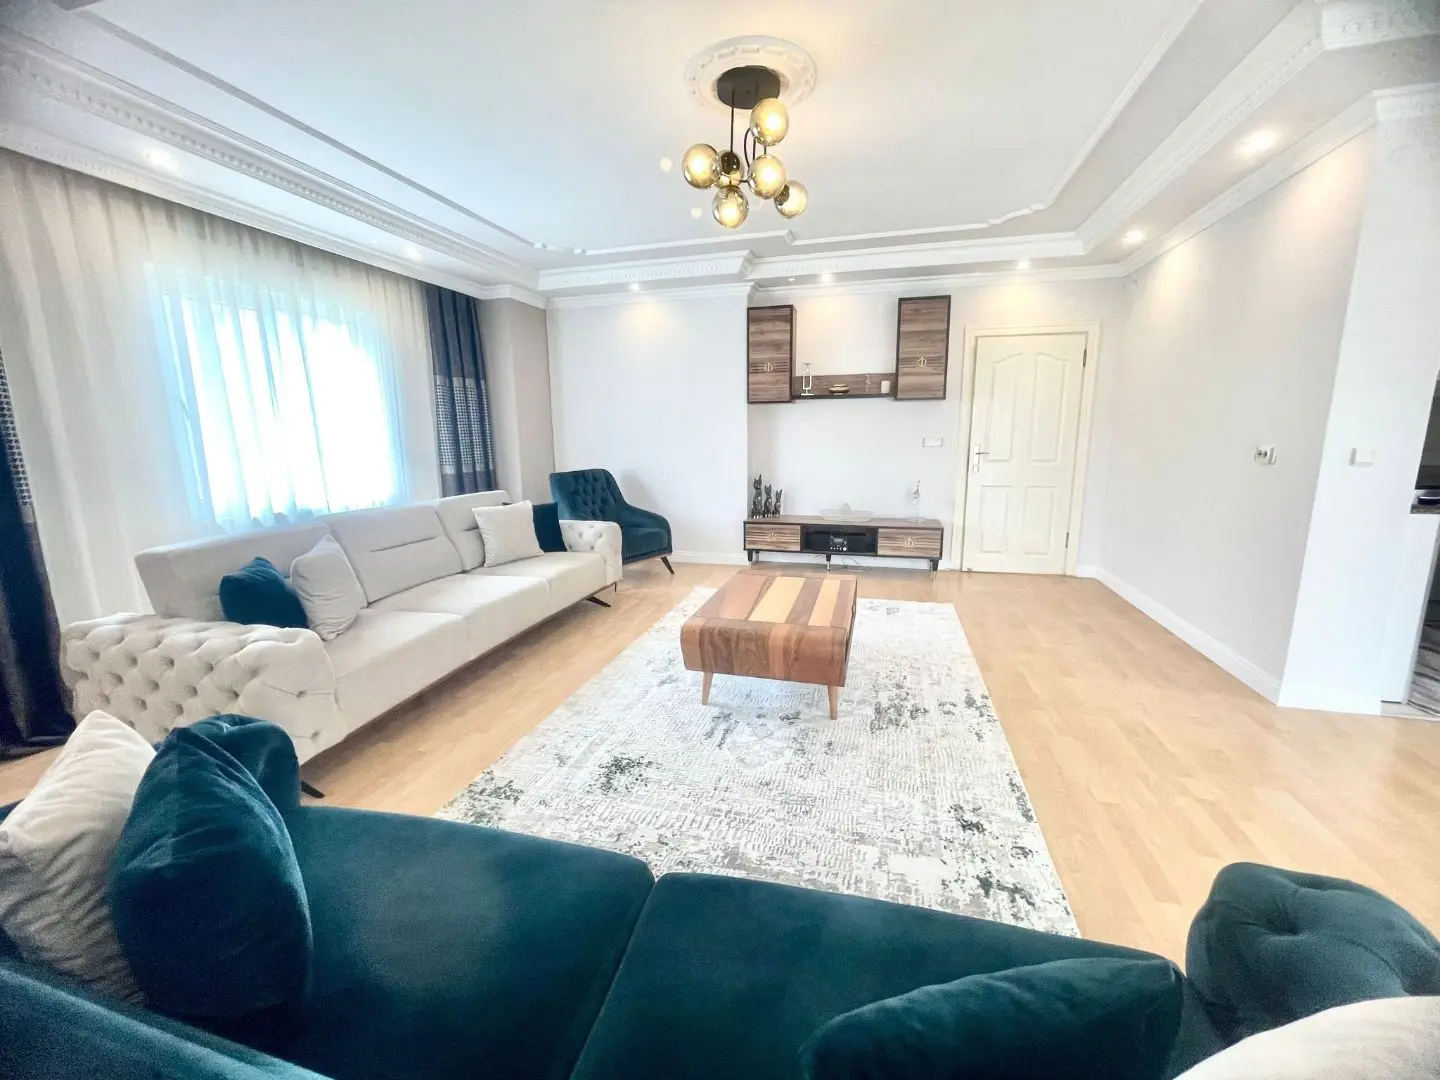 SPACIOUS 4+2 DUPLEKS JUST 200M FROM THE SEA IN THE CENTER OF ALANYA